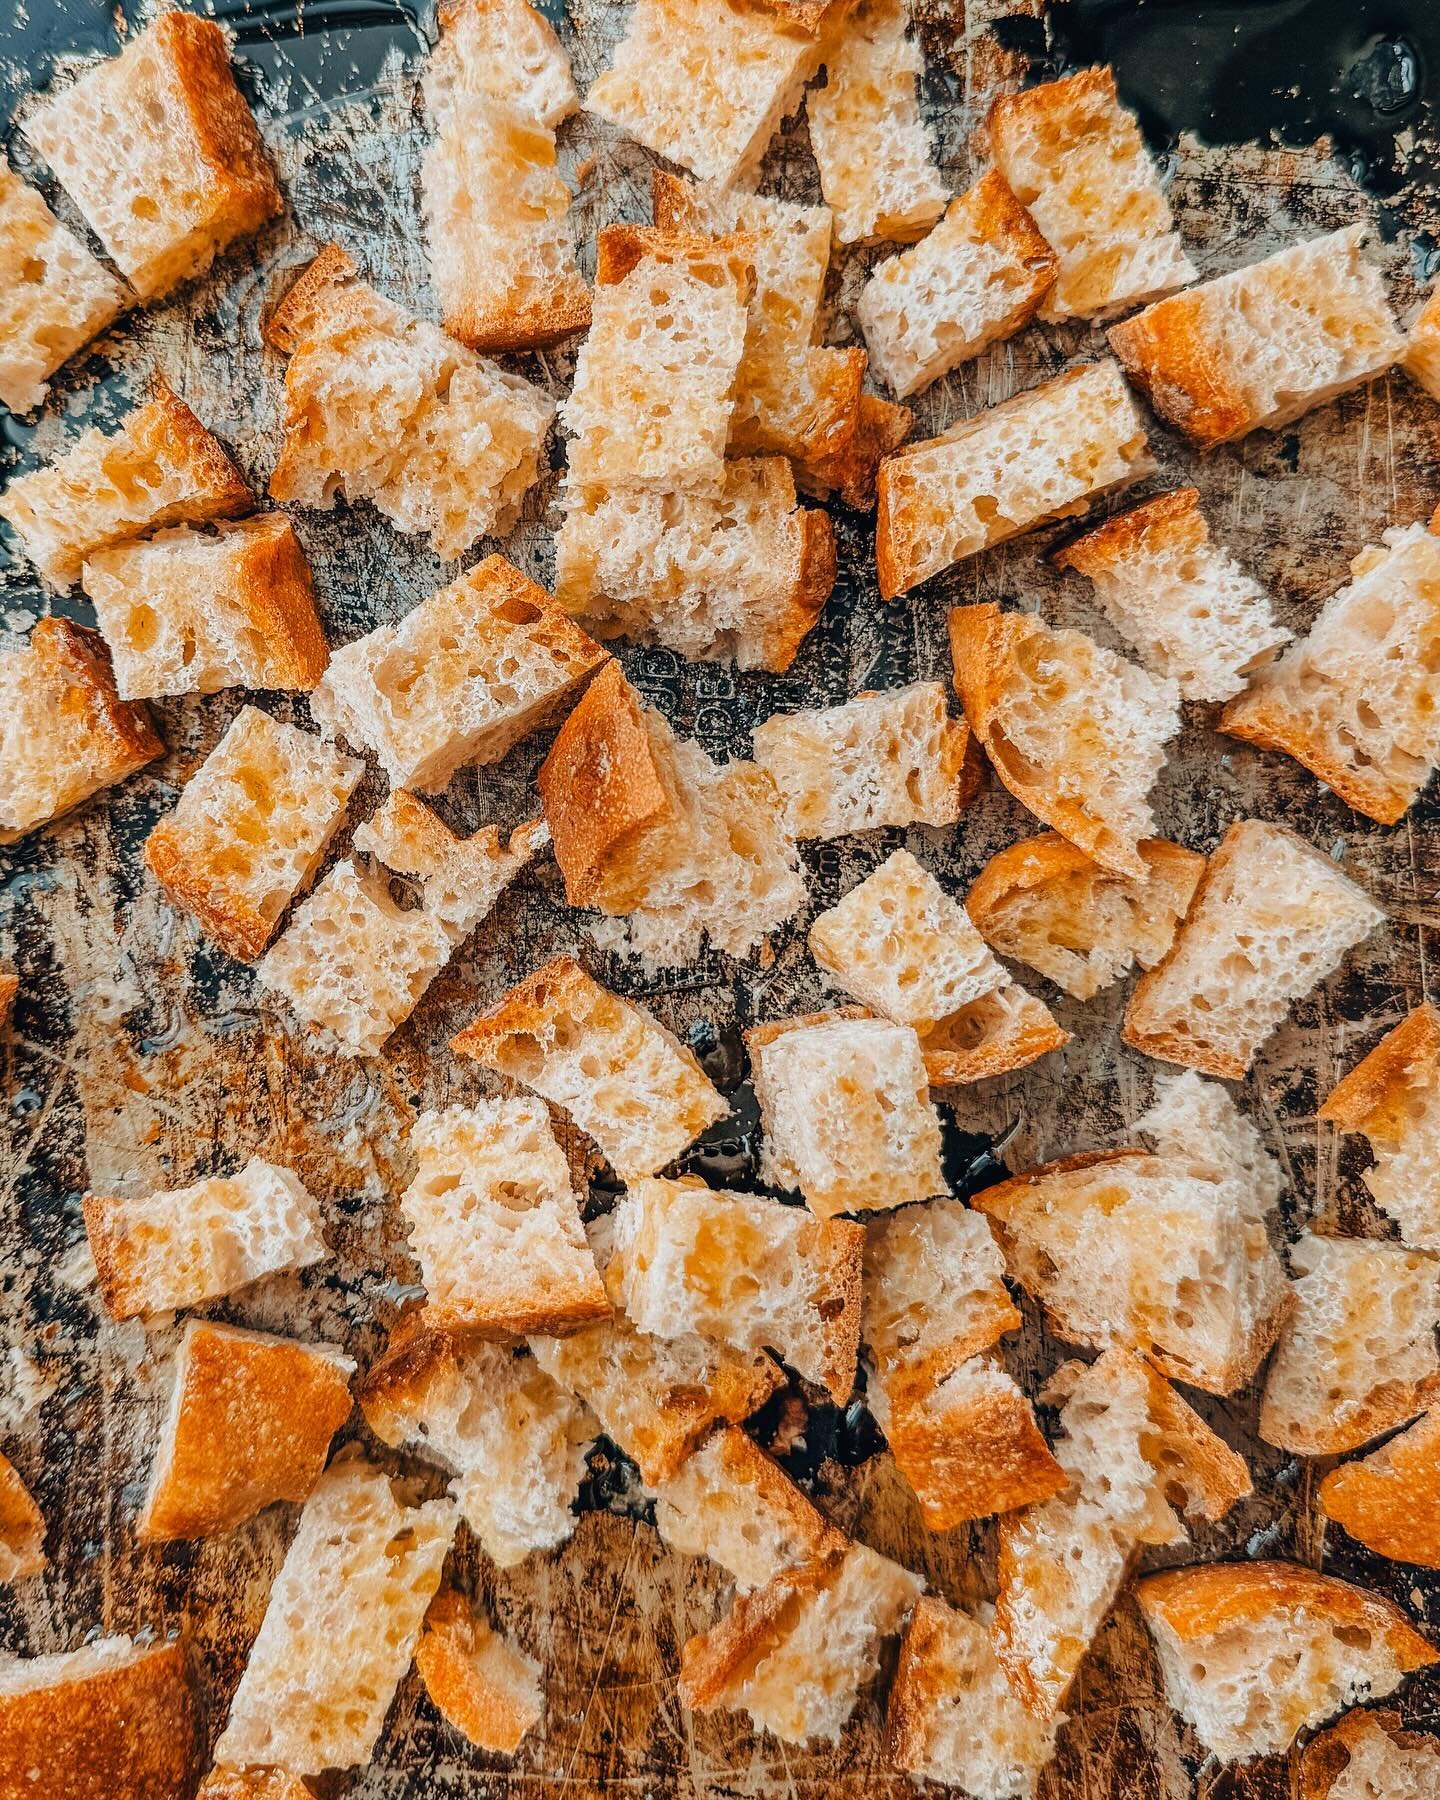 The one thing that can take a soup or salad from pretty good to REALLY GOOD is texture! One of my favorite ways to add texture is with a crouton. 

And truly the best croutons are homemade. If you&rsquo;re intimated by making homemade croutons, don&r